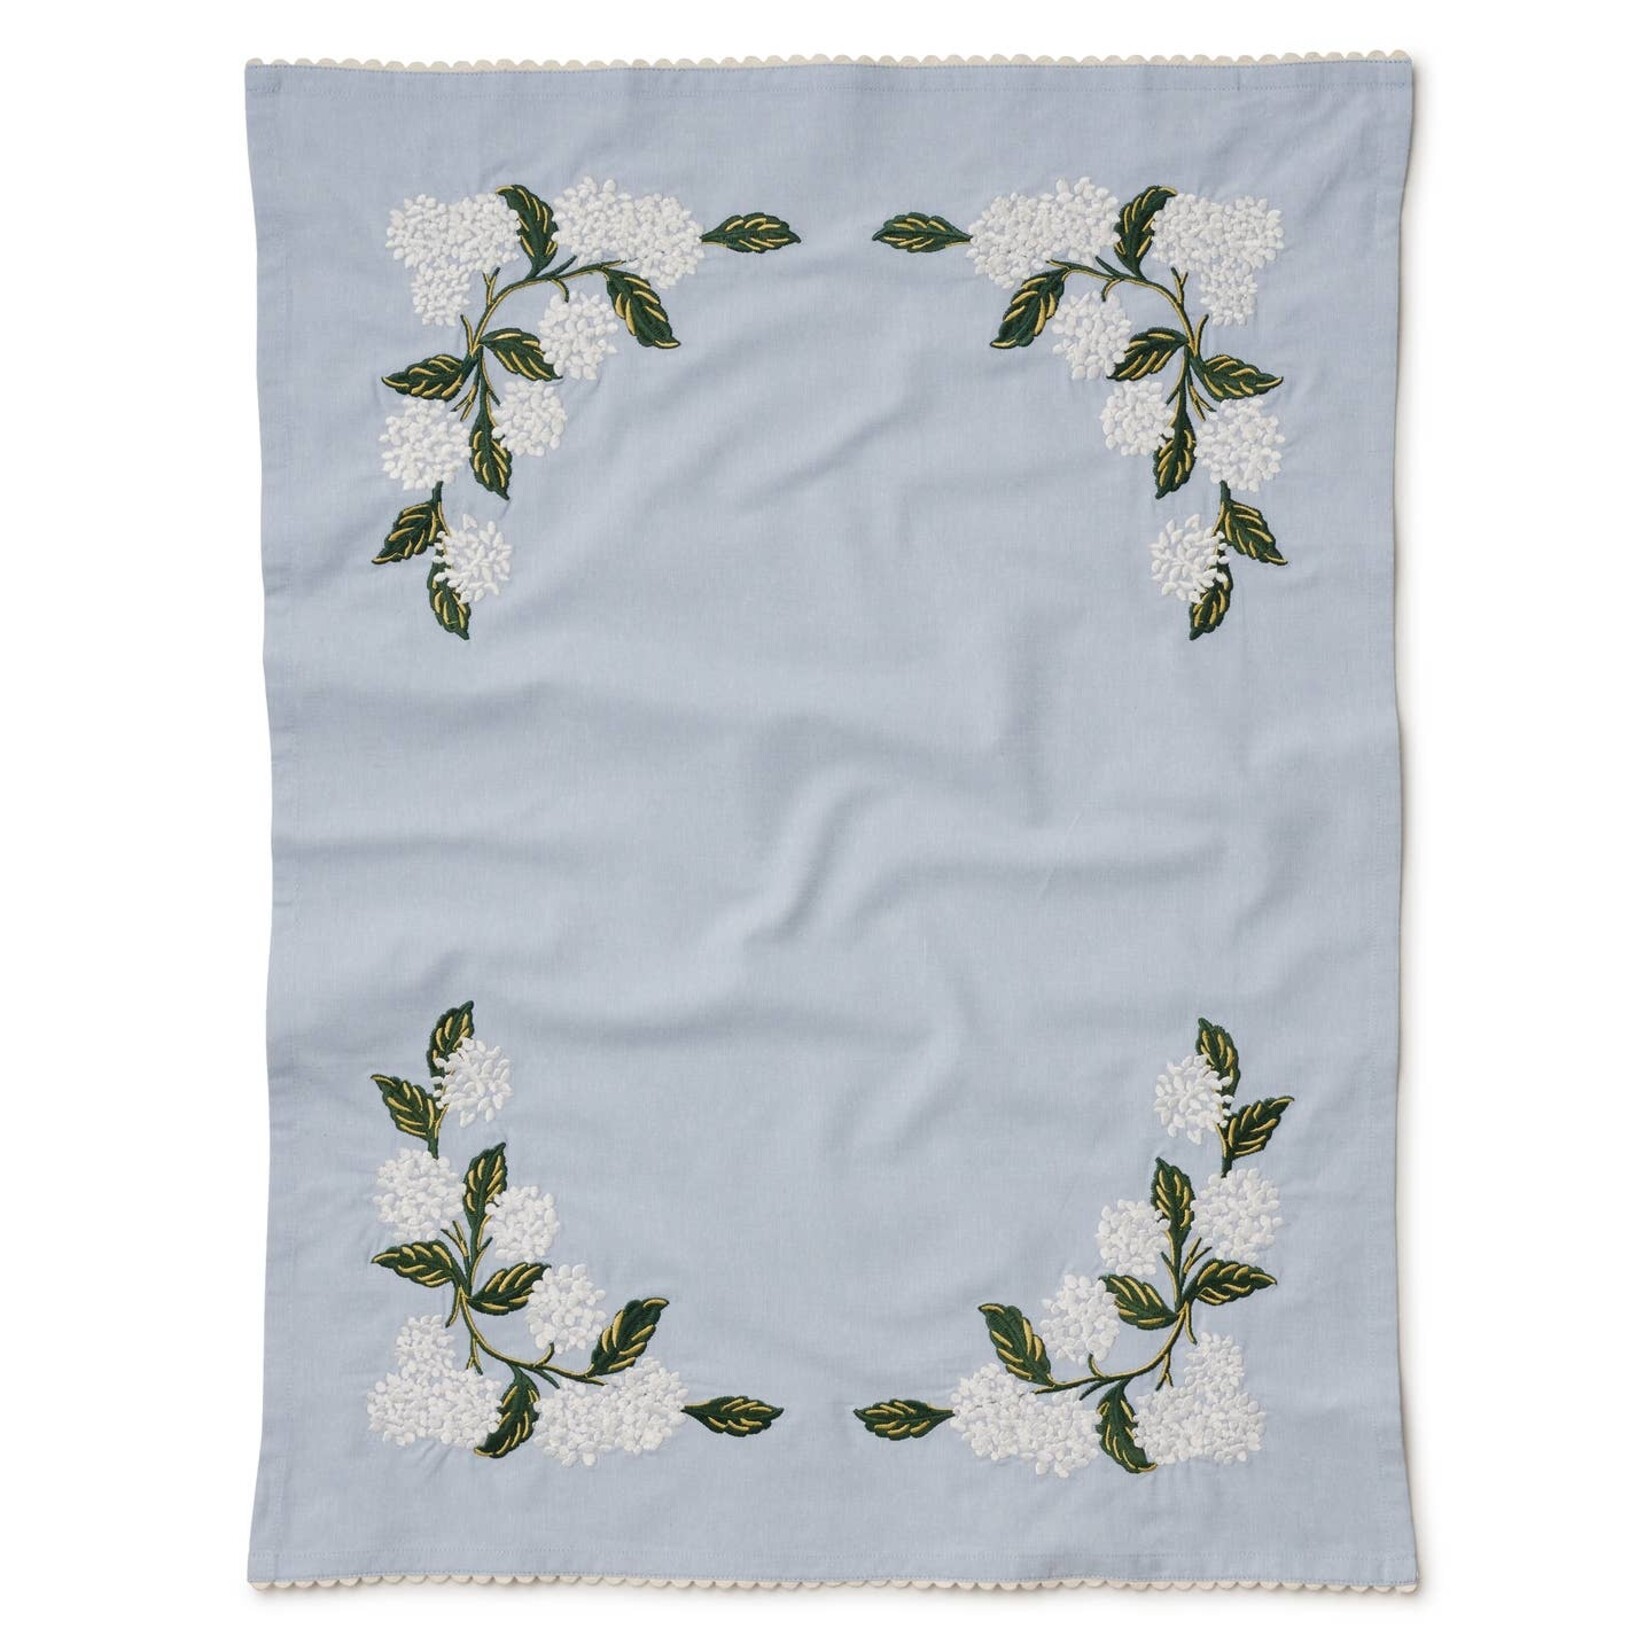 Rifle Paper Co Embroidered Tea Towel